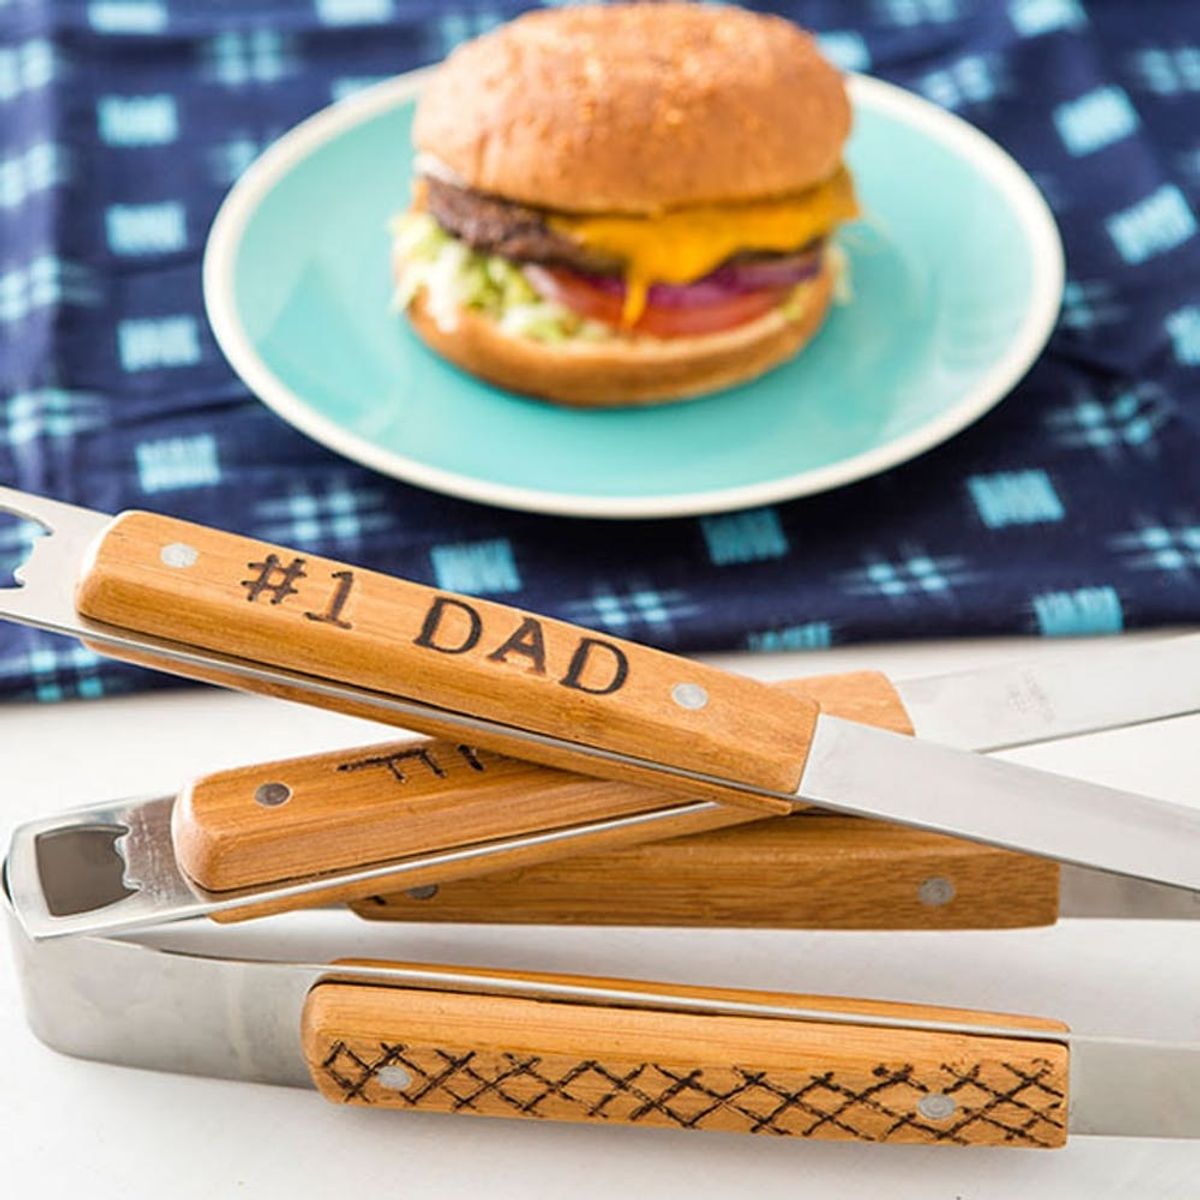 12 Dad-Approved Grilling Hacks That Will Upgrade Your Summer